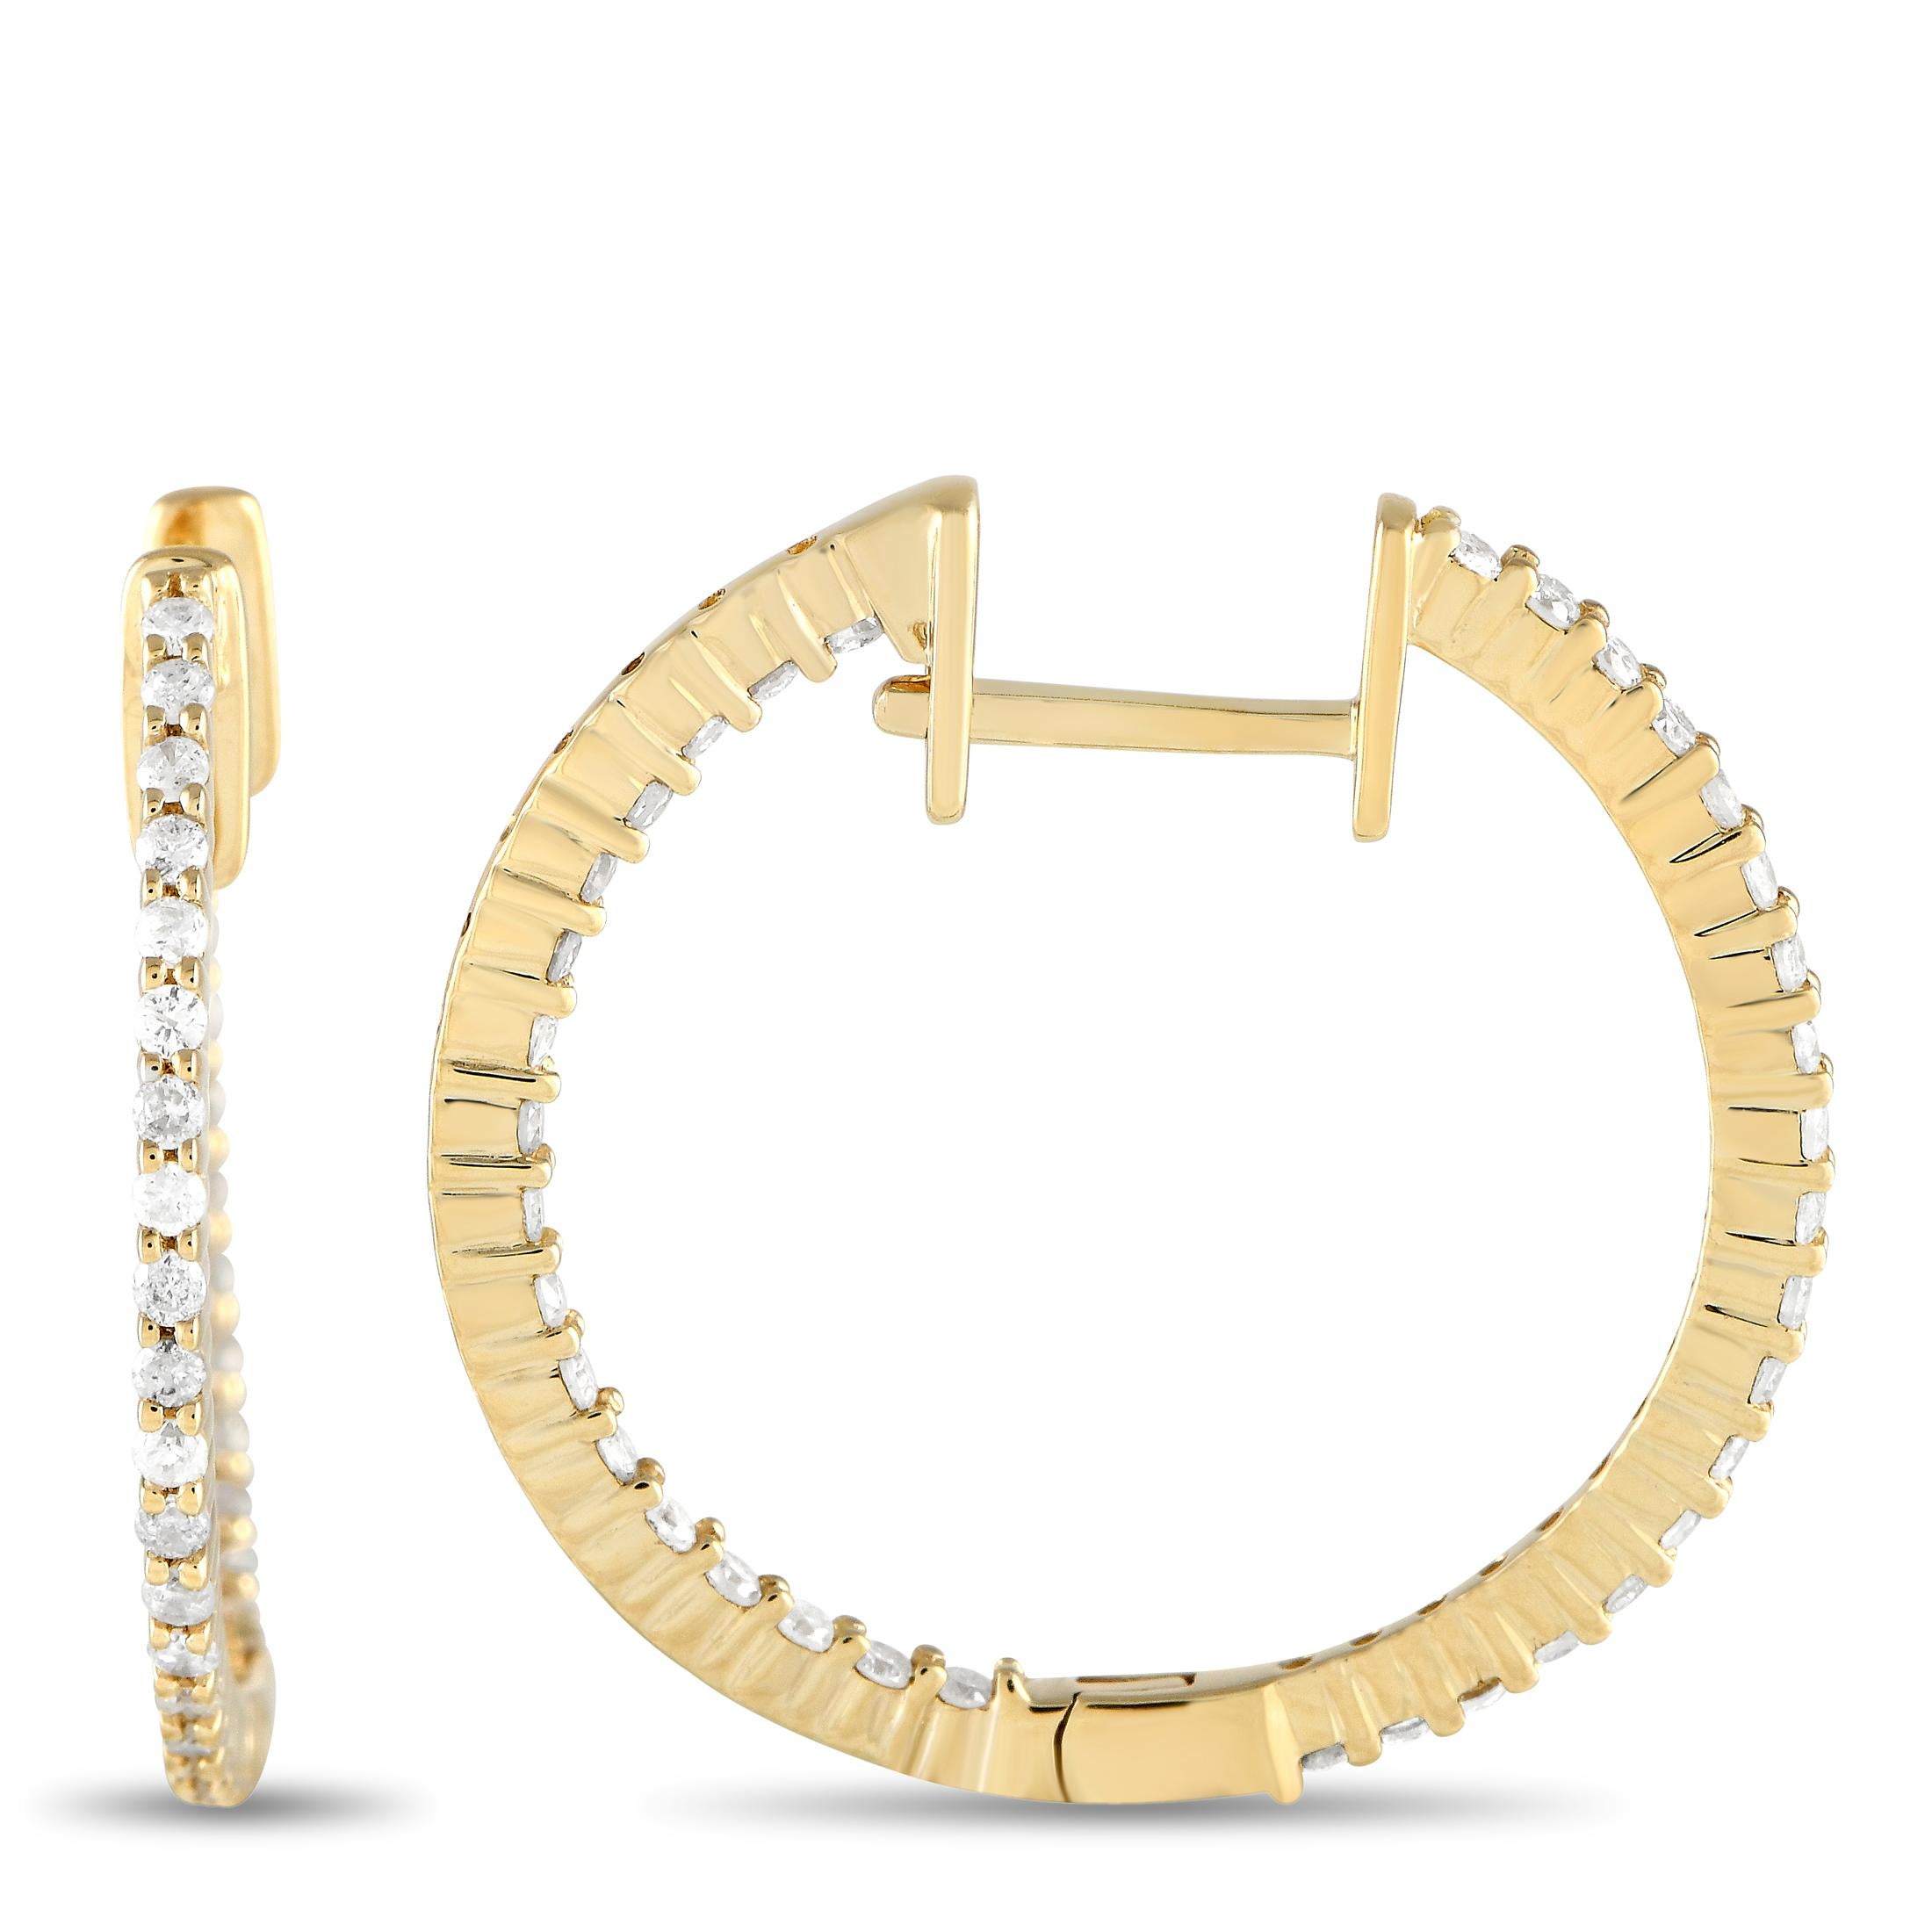 Sleek and delicate in design, these elegant 14K Yellow Gold hoop earrings are a timeless addition to any jewelry collection. The simple setting measures 0.80” round and beautifully showcases the series of sparkling diamonds – together they feature